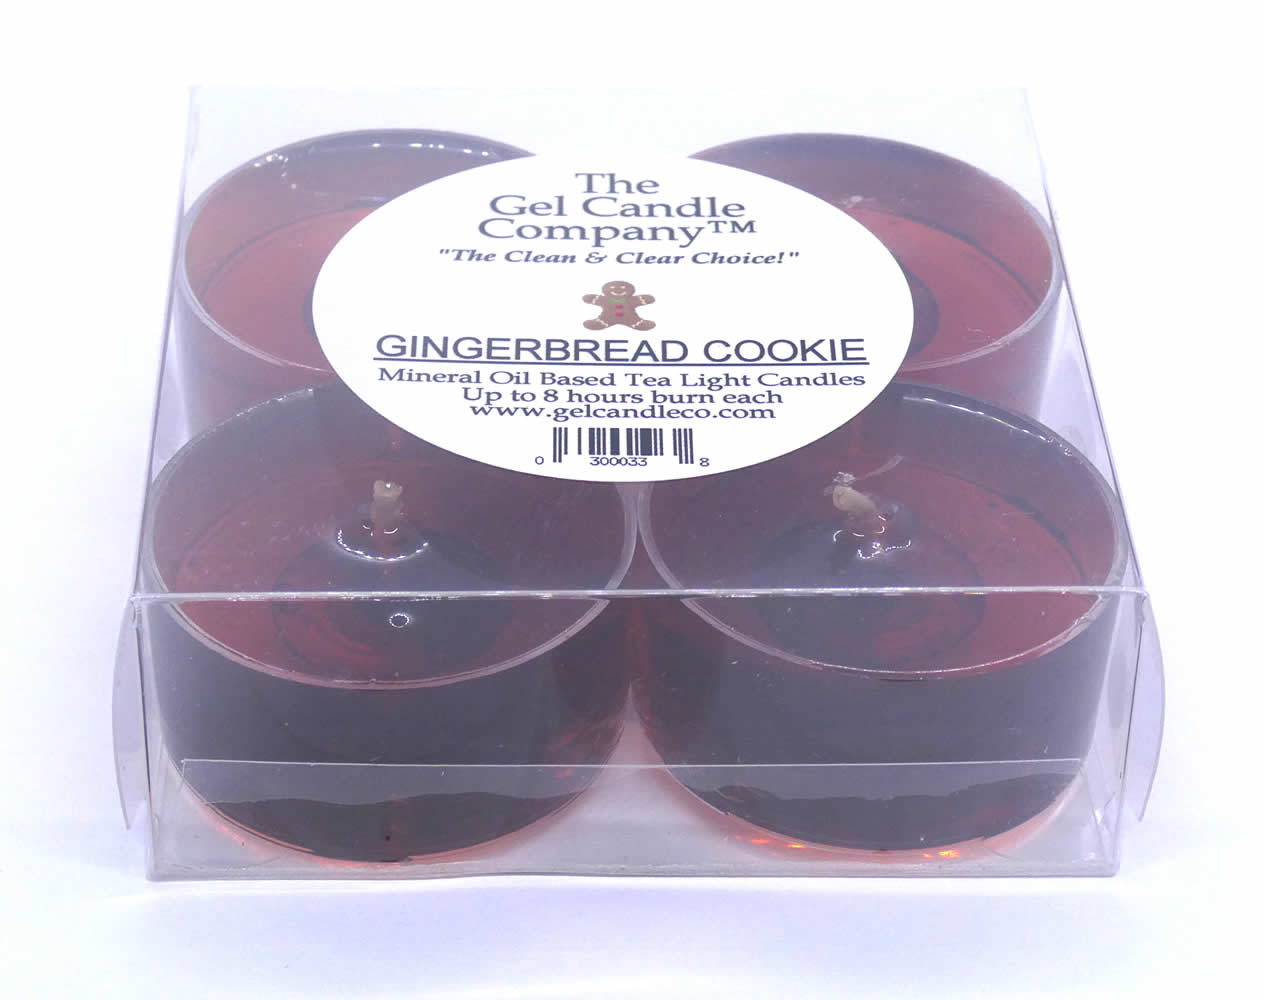 Gingerbread Cookie Scented Gel Candle Tea Lights - 4 pk. - Click Image to Close